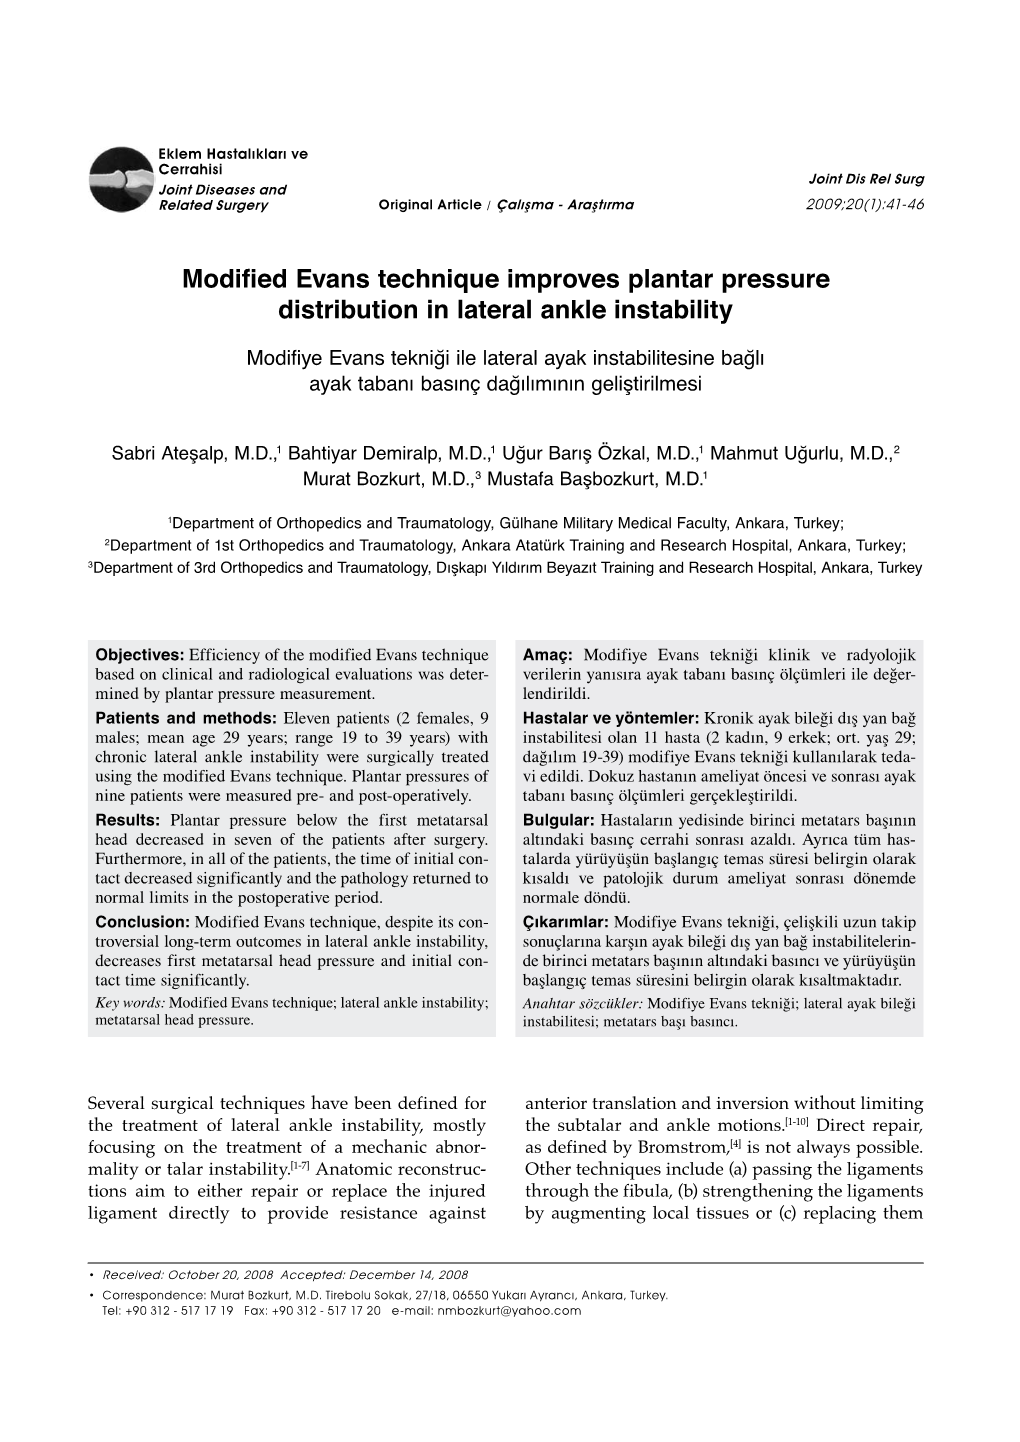 Modified Evans Technique Improves Plantar Pressure Distribution in Lateral Ankle Instability